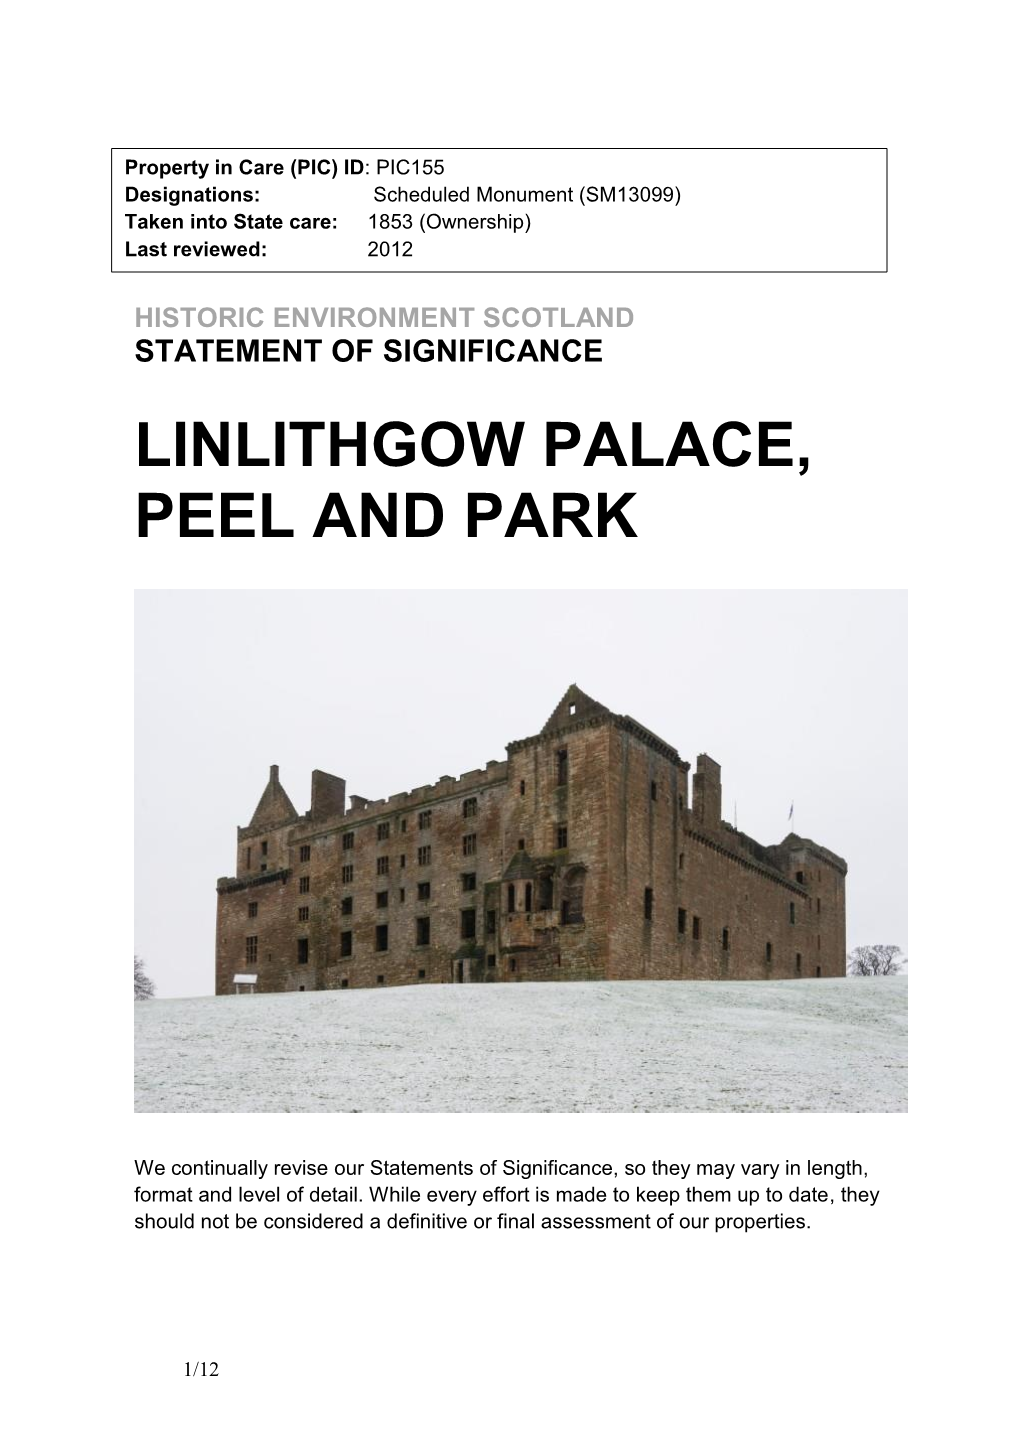 Linlithgow Palace, Peel and Park